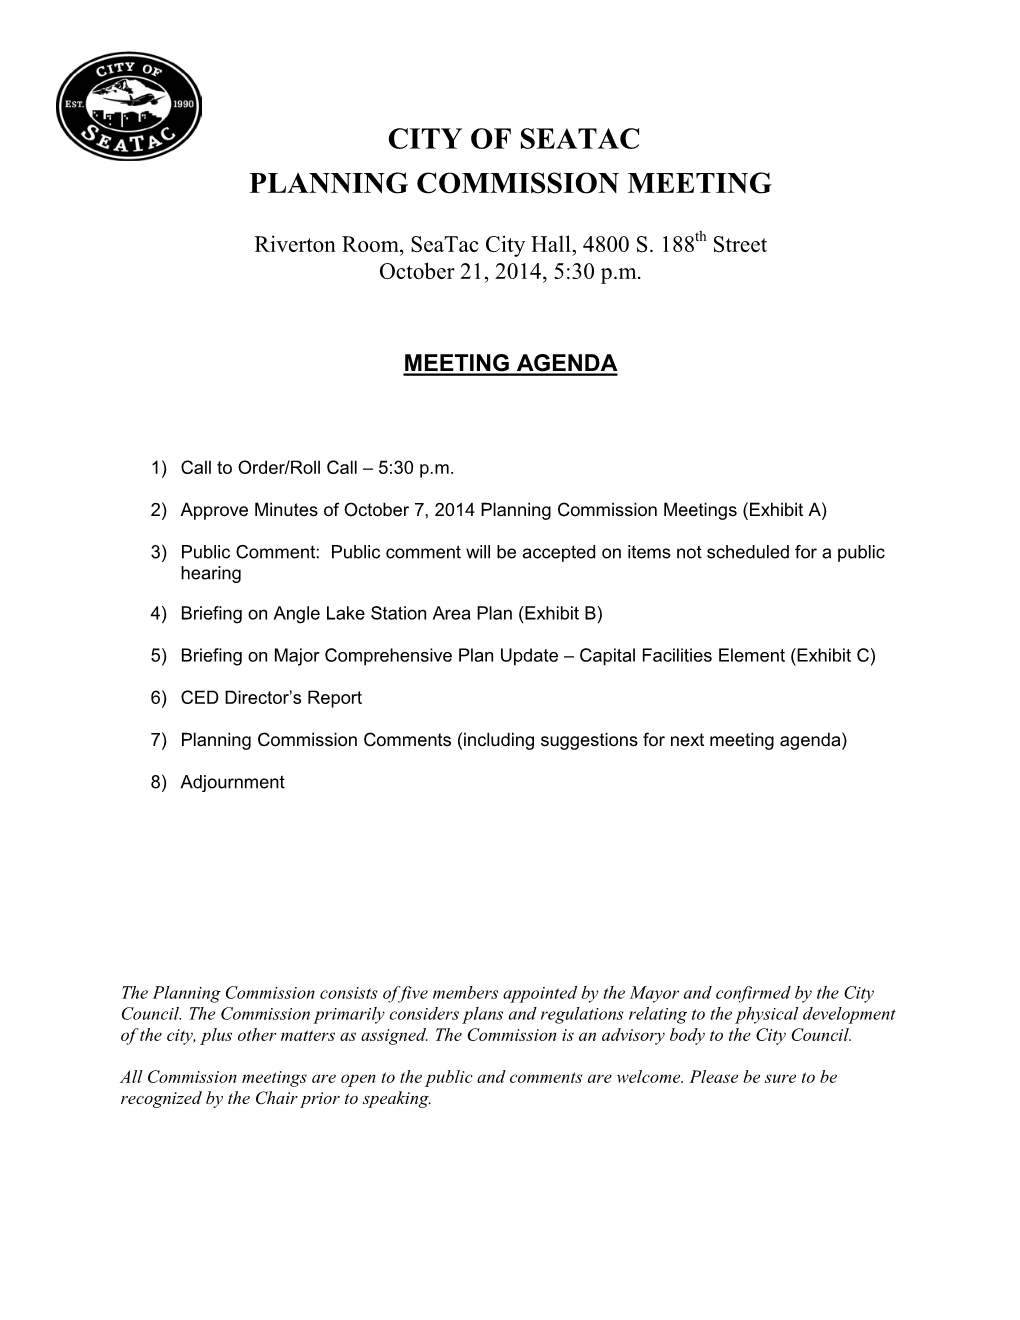 City of Seatac Planning Commission Meeting